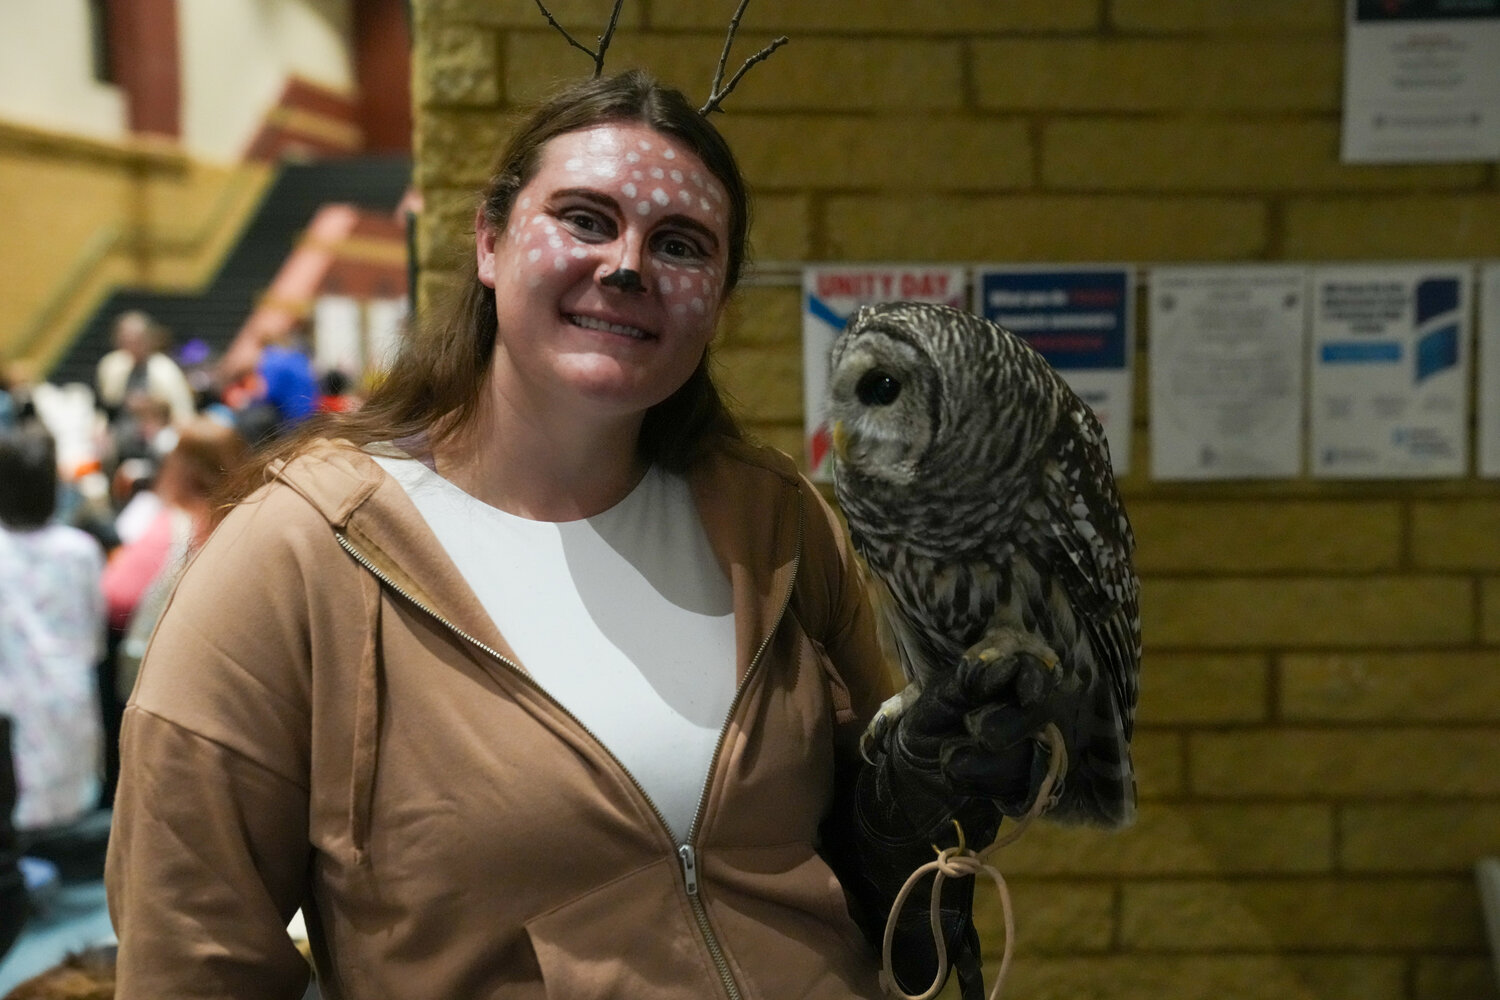 Carpenter Nature Center brought an informative booth to the Community Halloween Party. They had a variety of furs along with a live snake and this beautiful owl.